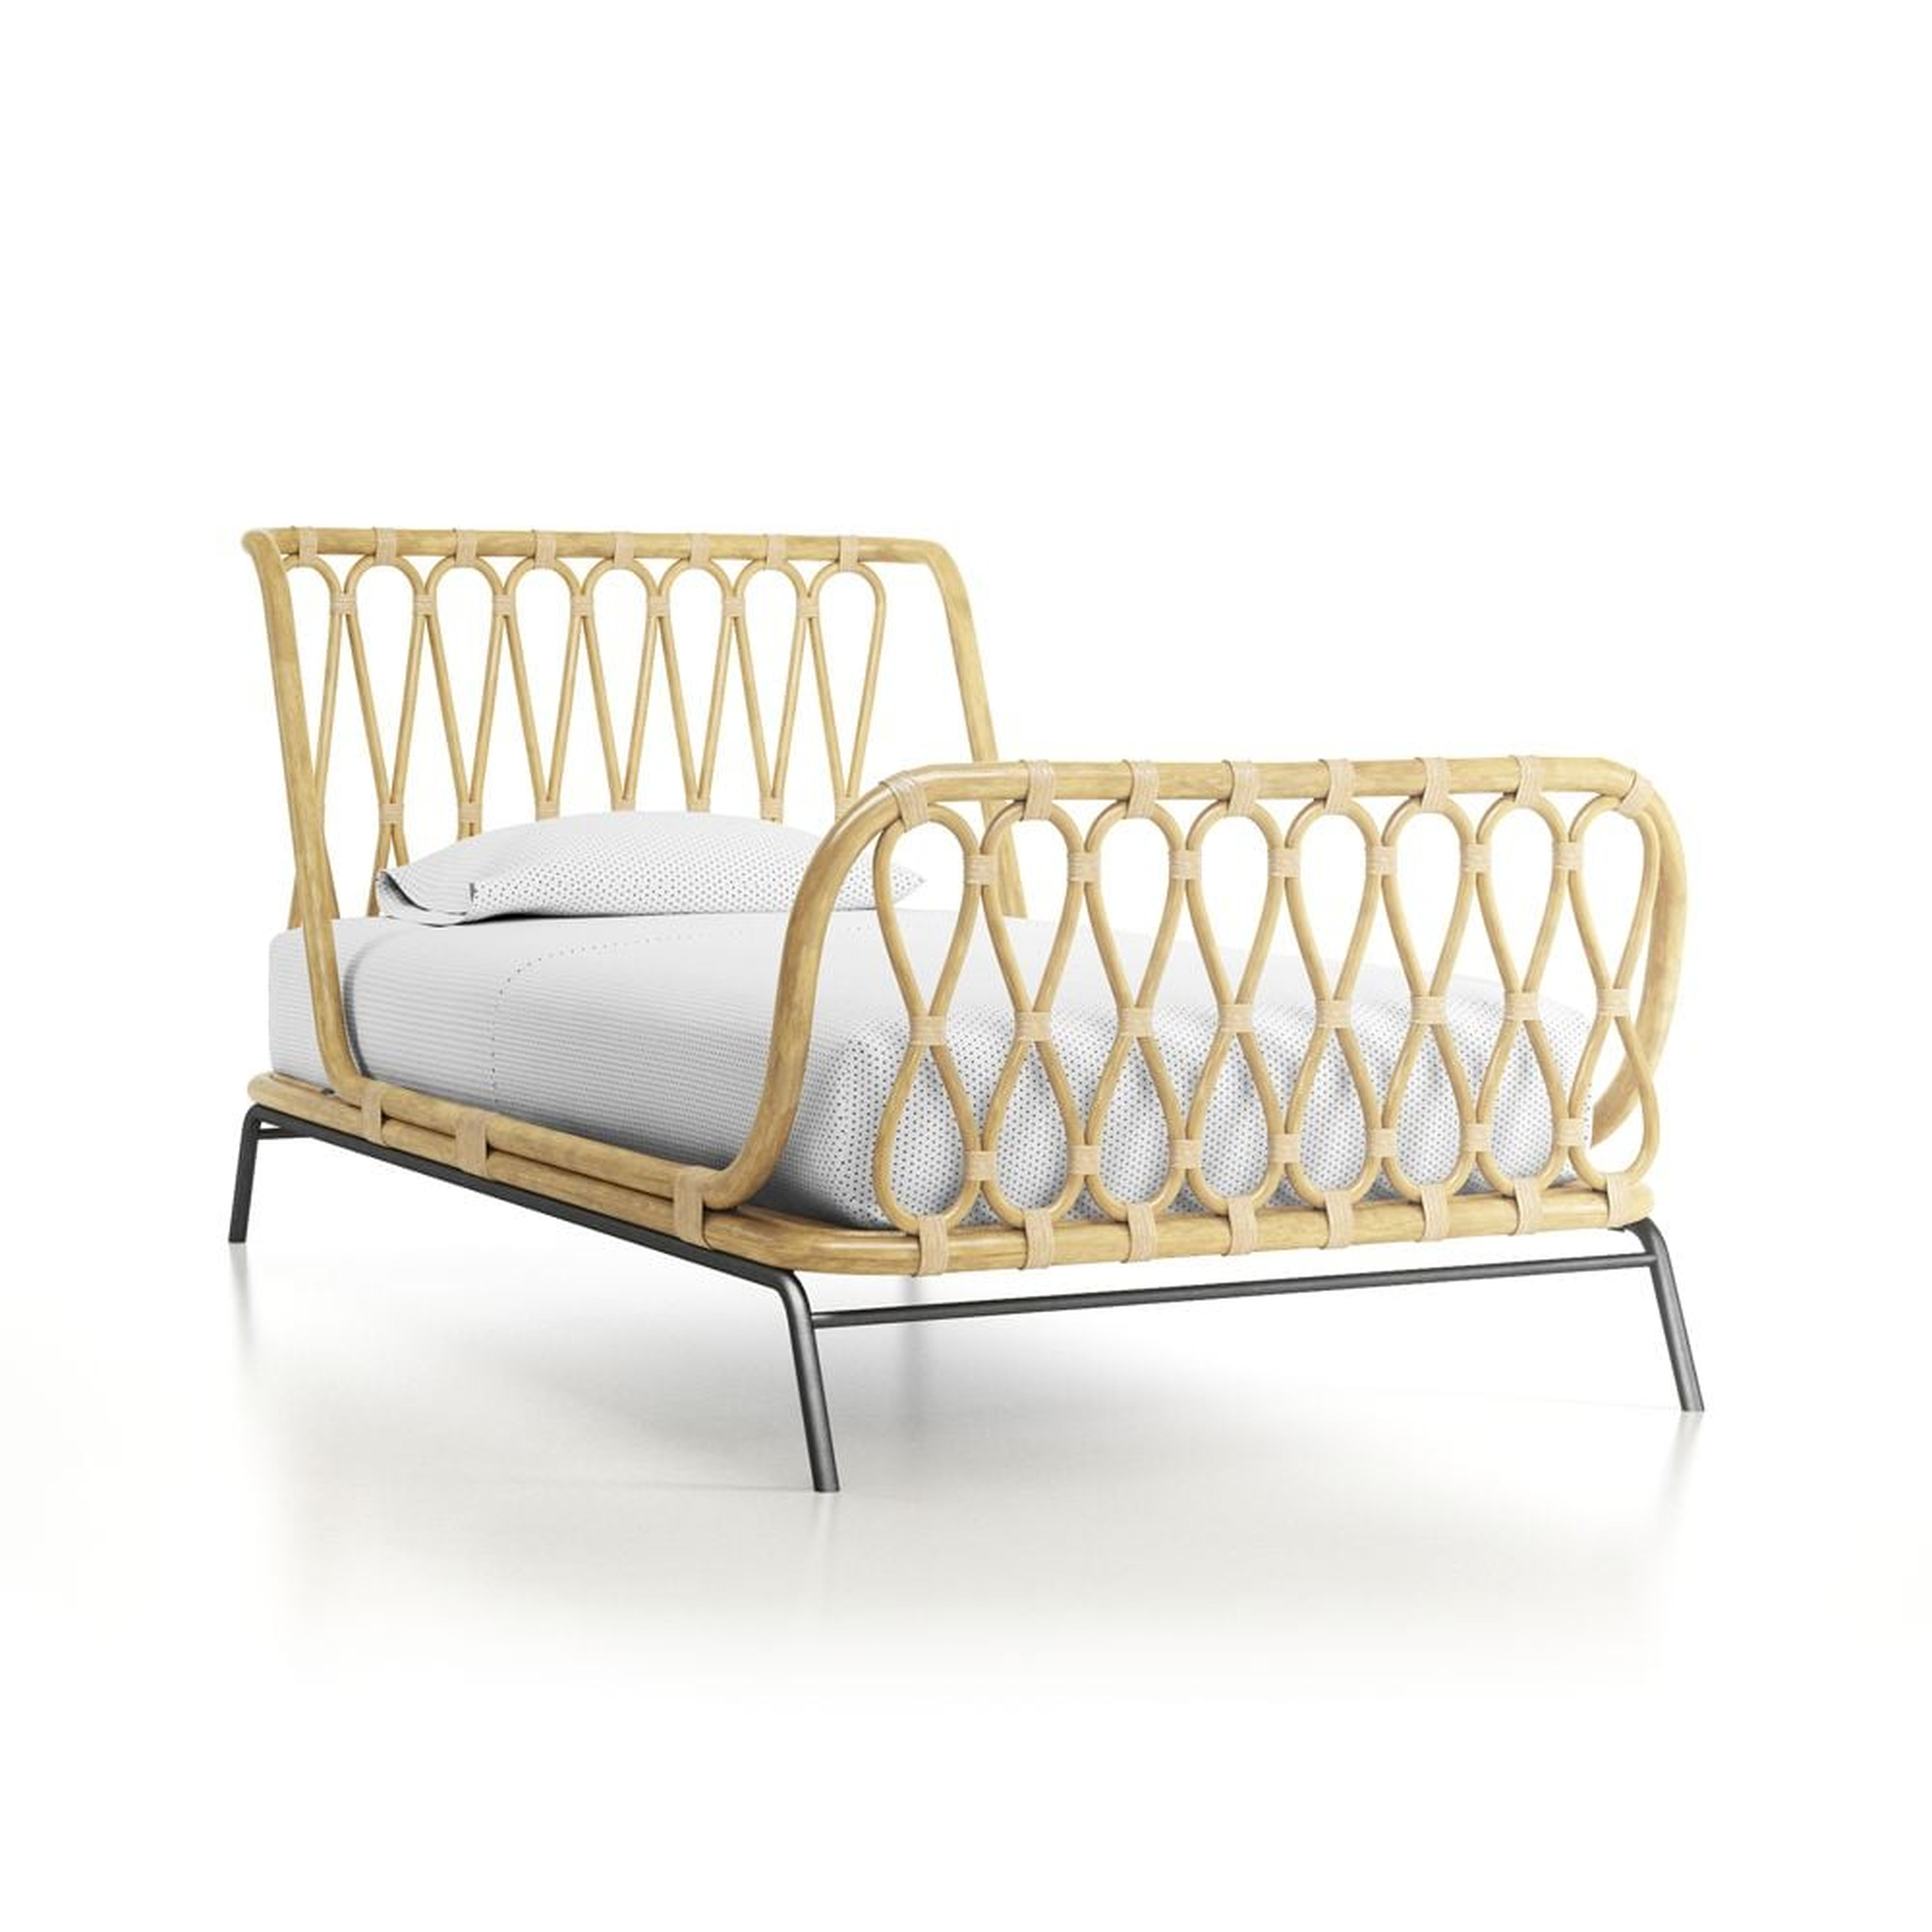 Rattan Kids Twin Bed - Crate and Barrel